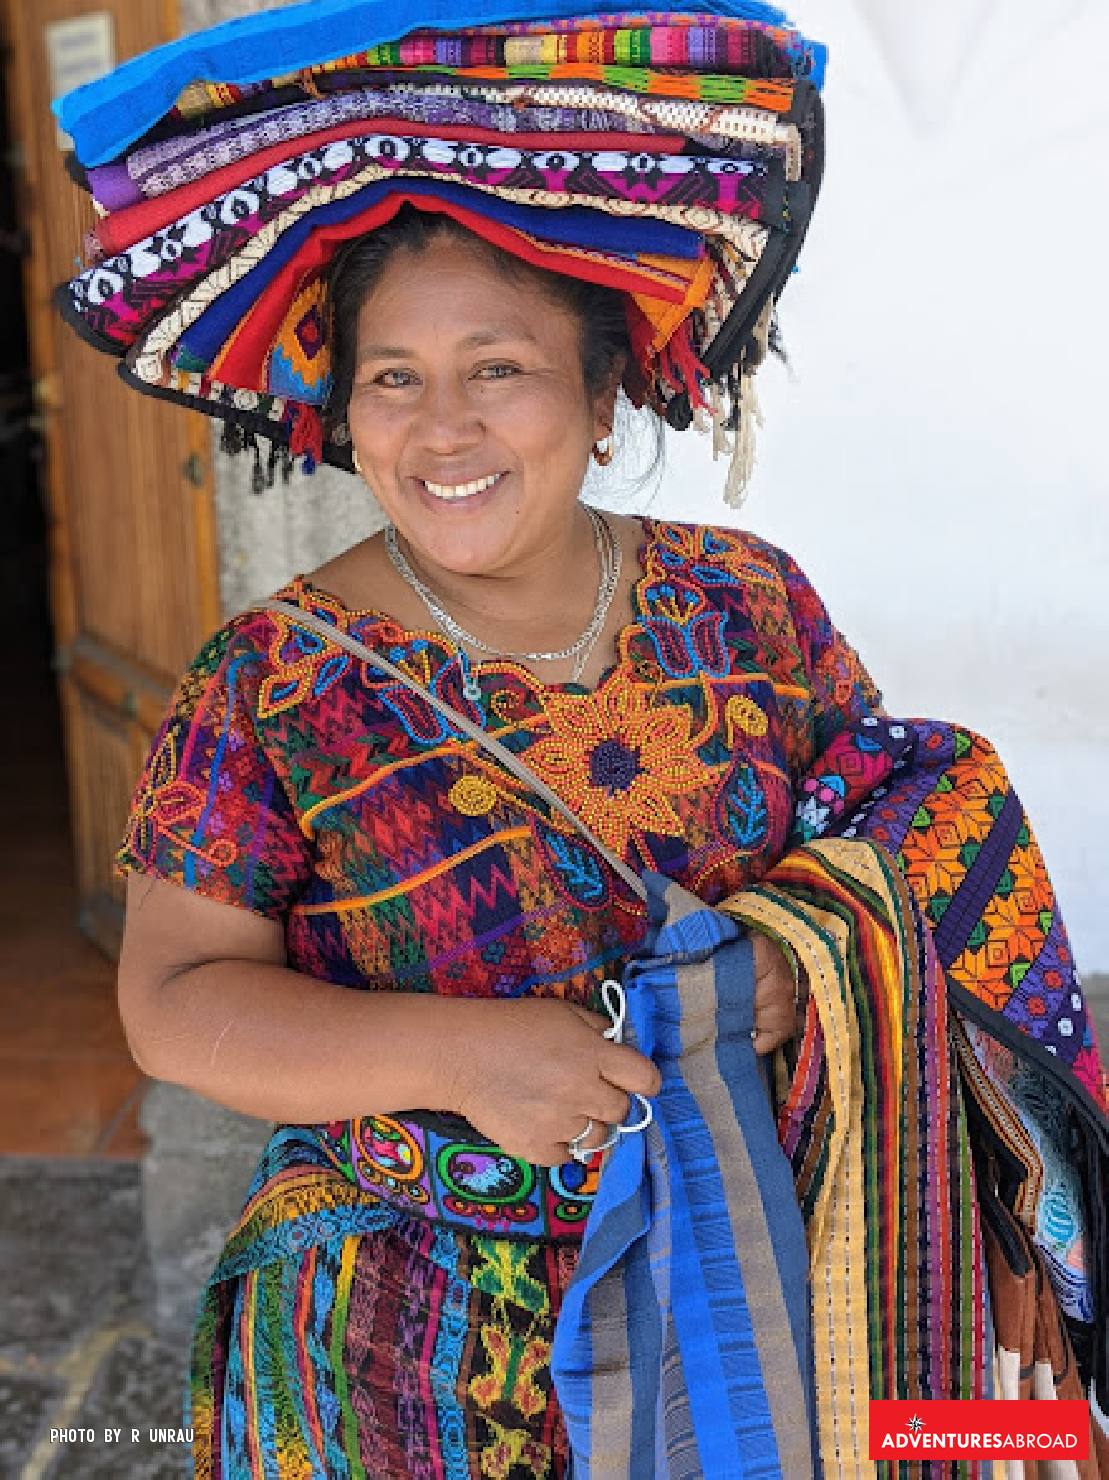 Guatemala Tours (See Pre-Columbian Sites, Volcanos & More)